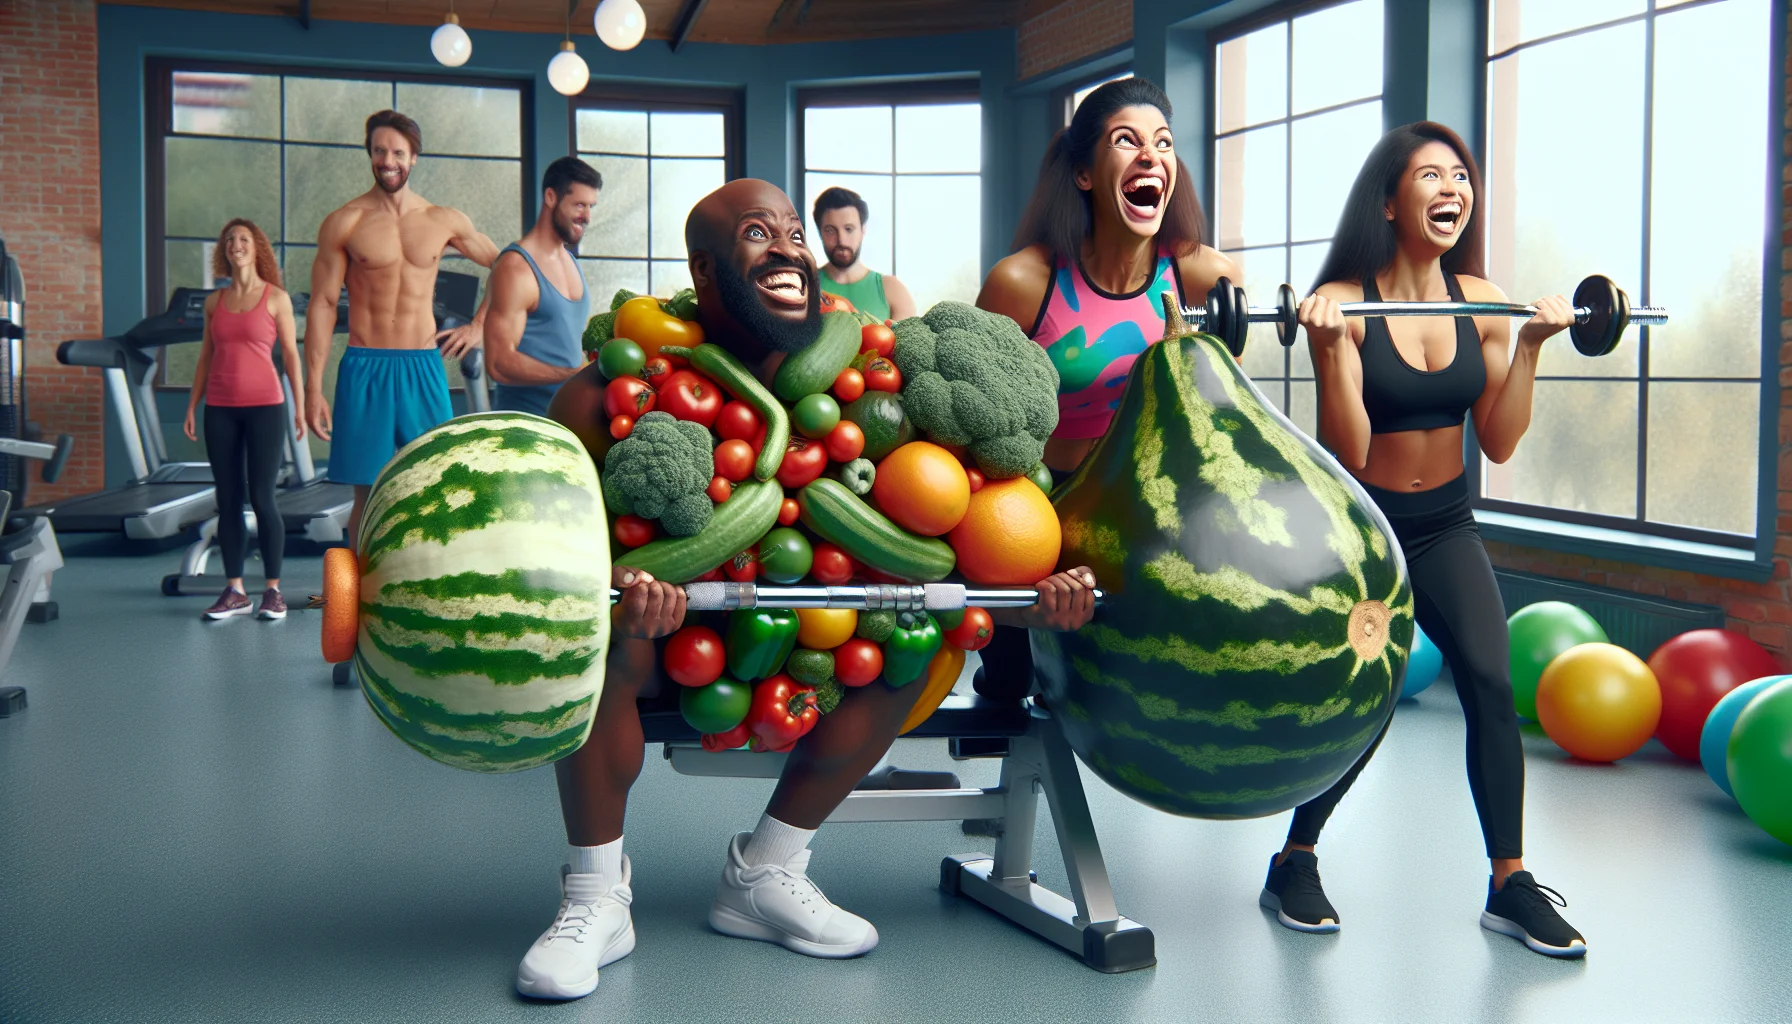 Create a comical and engaging image representative of body sculpting diets and the allure of exercise. It could illustrate a goofy scenario where a Hispanic man and a Black woman are at a gym, lifting weights made out of gigantic vegetables and fruits. They're wearing colorful gym clothes, straining and laughing as they struggle to lift these oversized 'dumbbells'. In the background, other gym-goers look on, with expressions ranging from amused to inspired. The overall tone should be playful, humorous, and motivating, showcasing the lighter side of attending to physical fitness and diet.